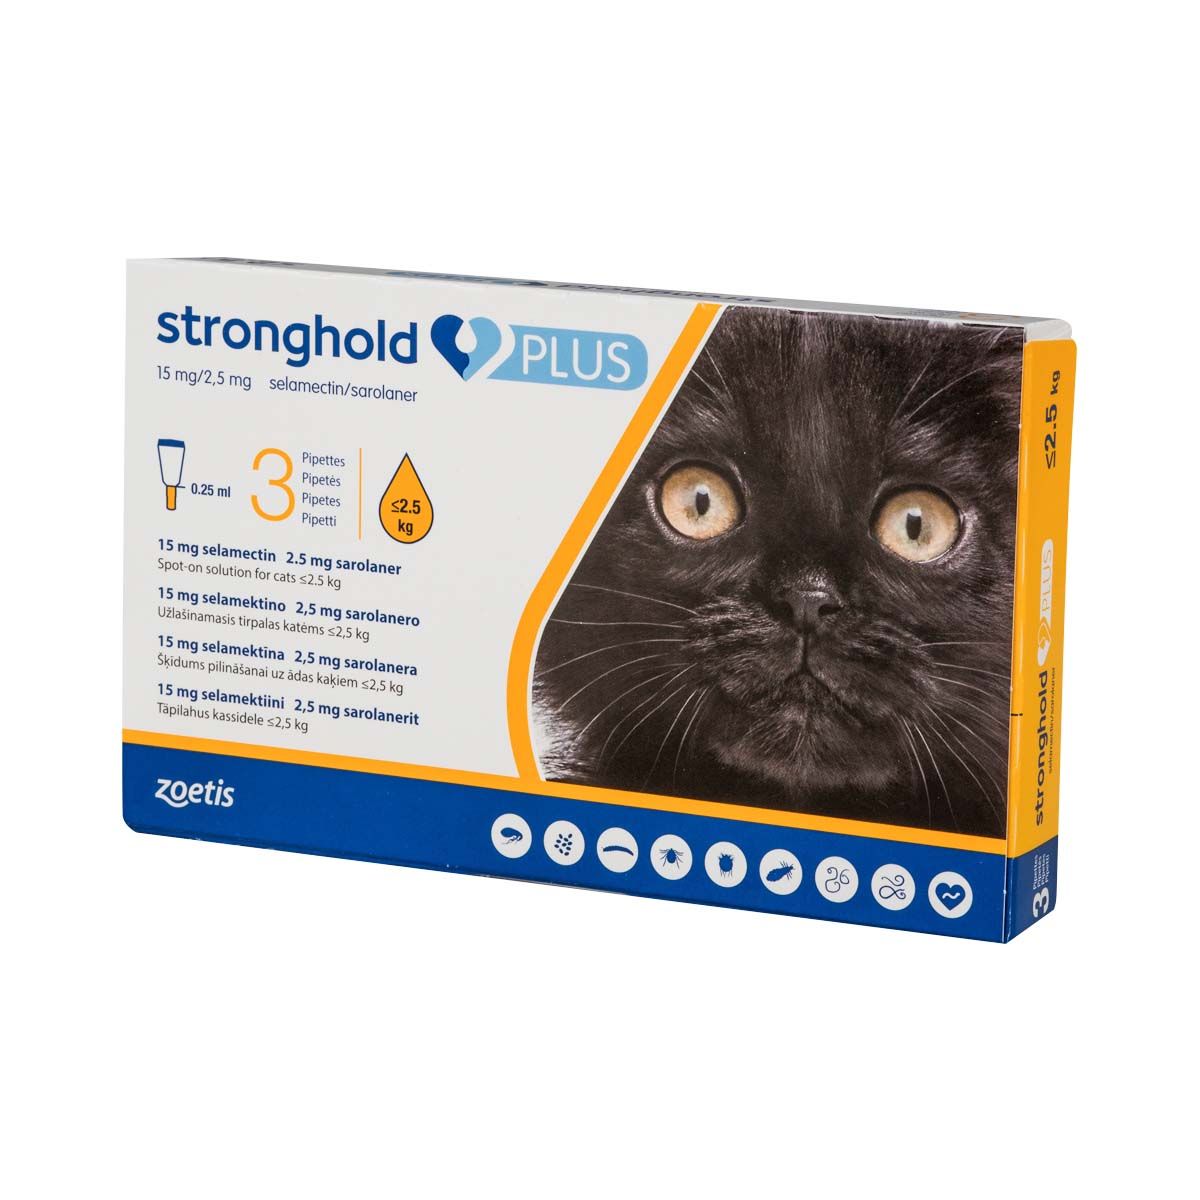 Stronghold Plus for Cats 2.8 5.5 lbs 6 tubes 66.00 Heartworm